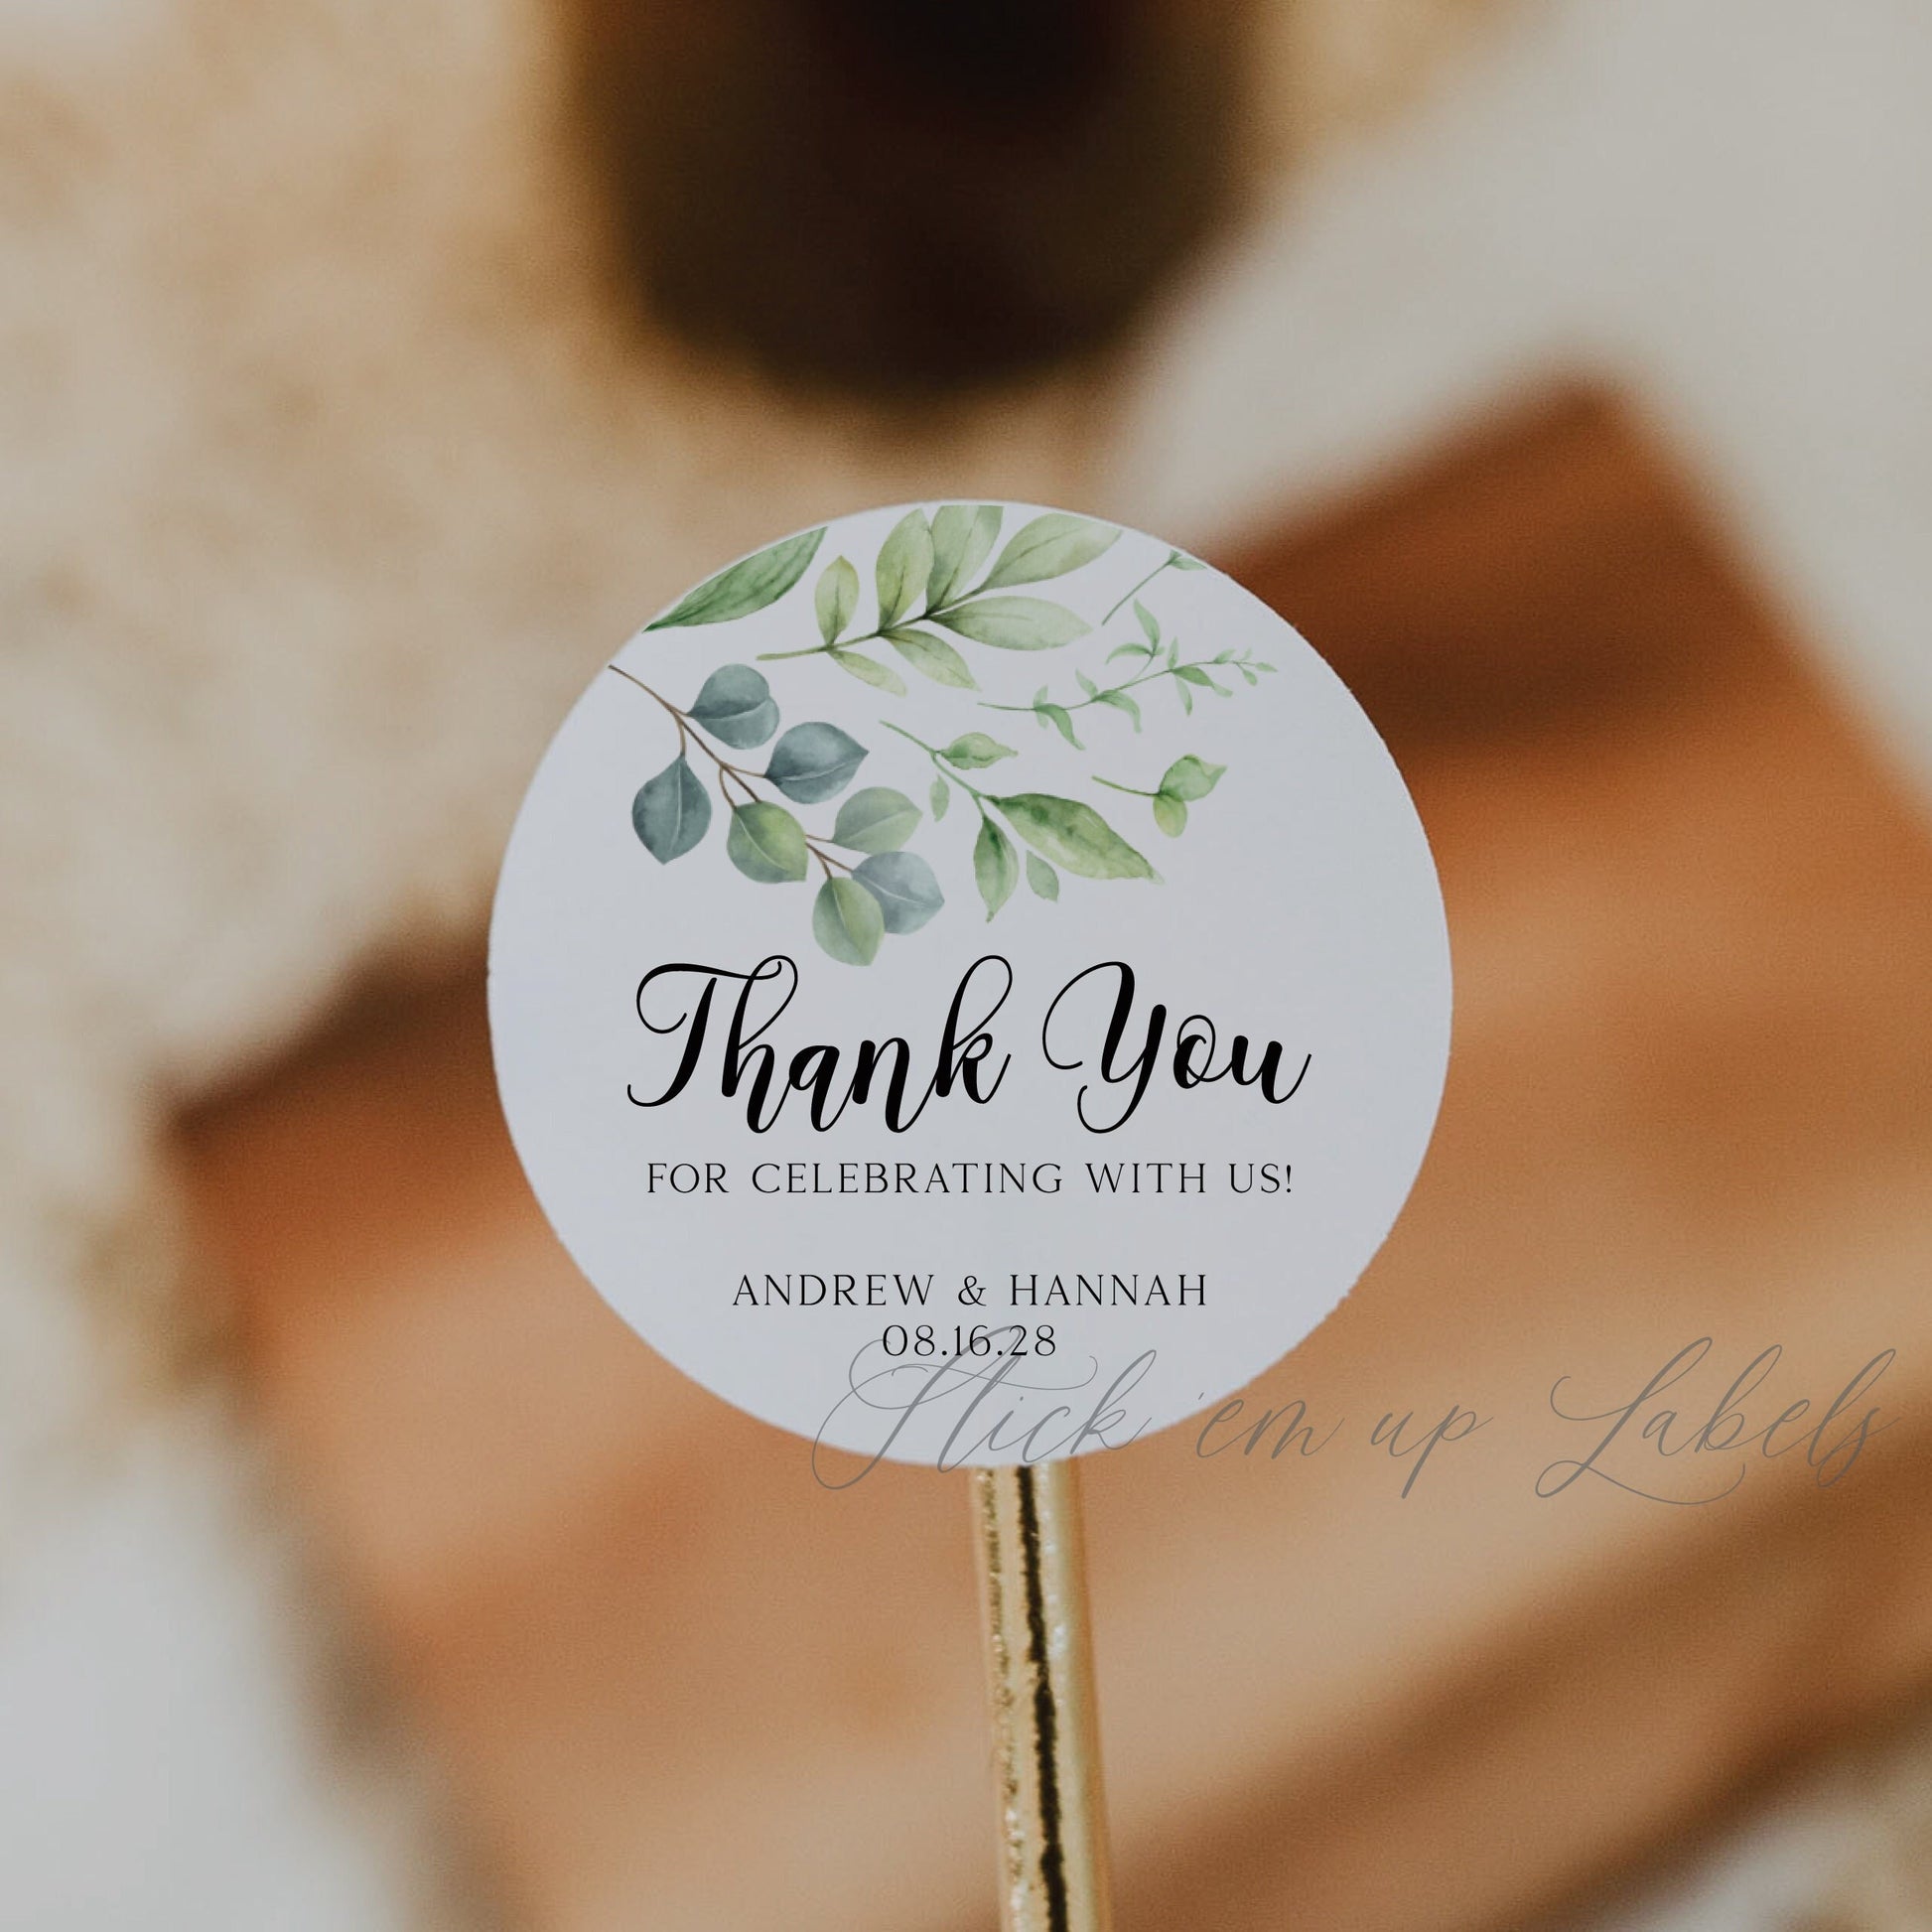 Wedding Thank You Stickers - Greenery Thank You Label, Wedding Favor Sticker, Botanical Wedding Sticker, Eucalyptus Wedding Sticker